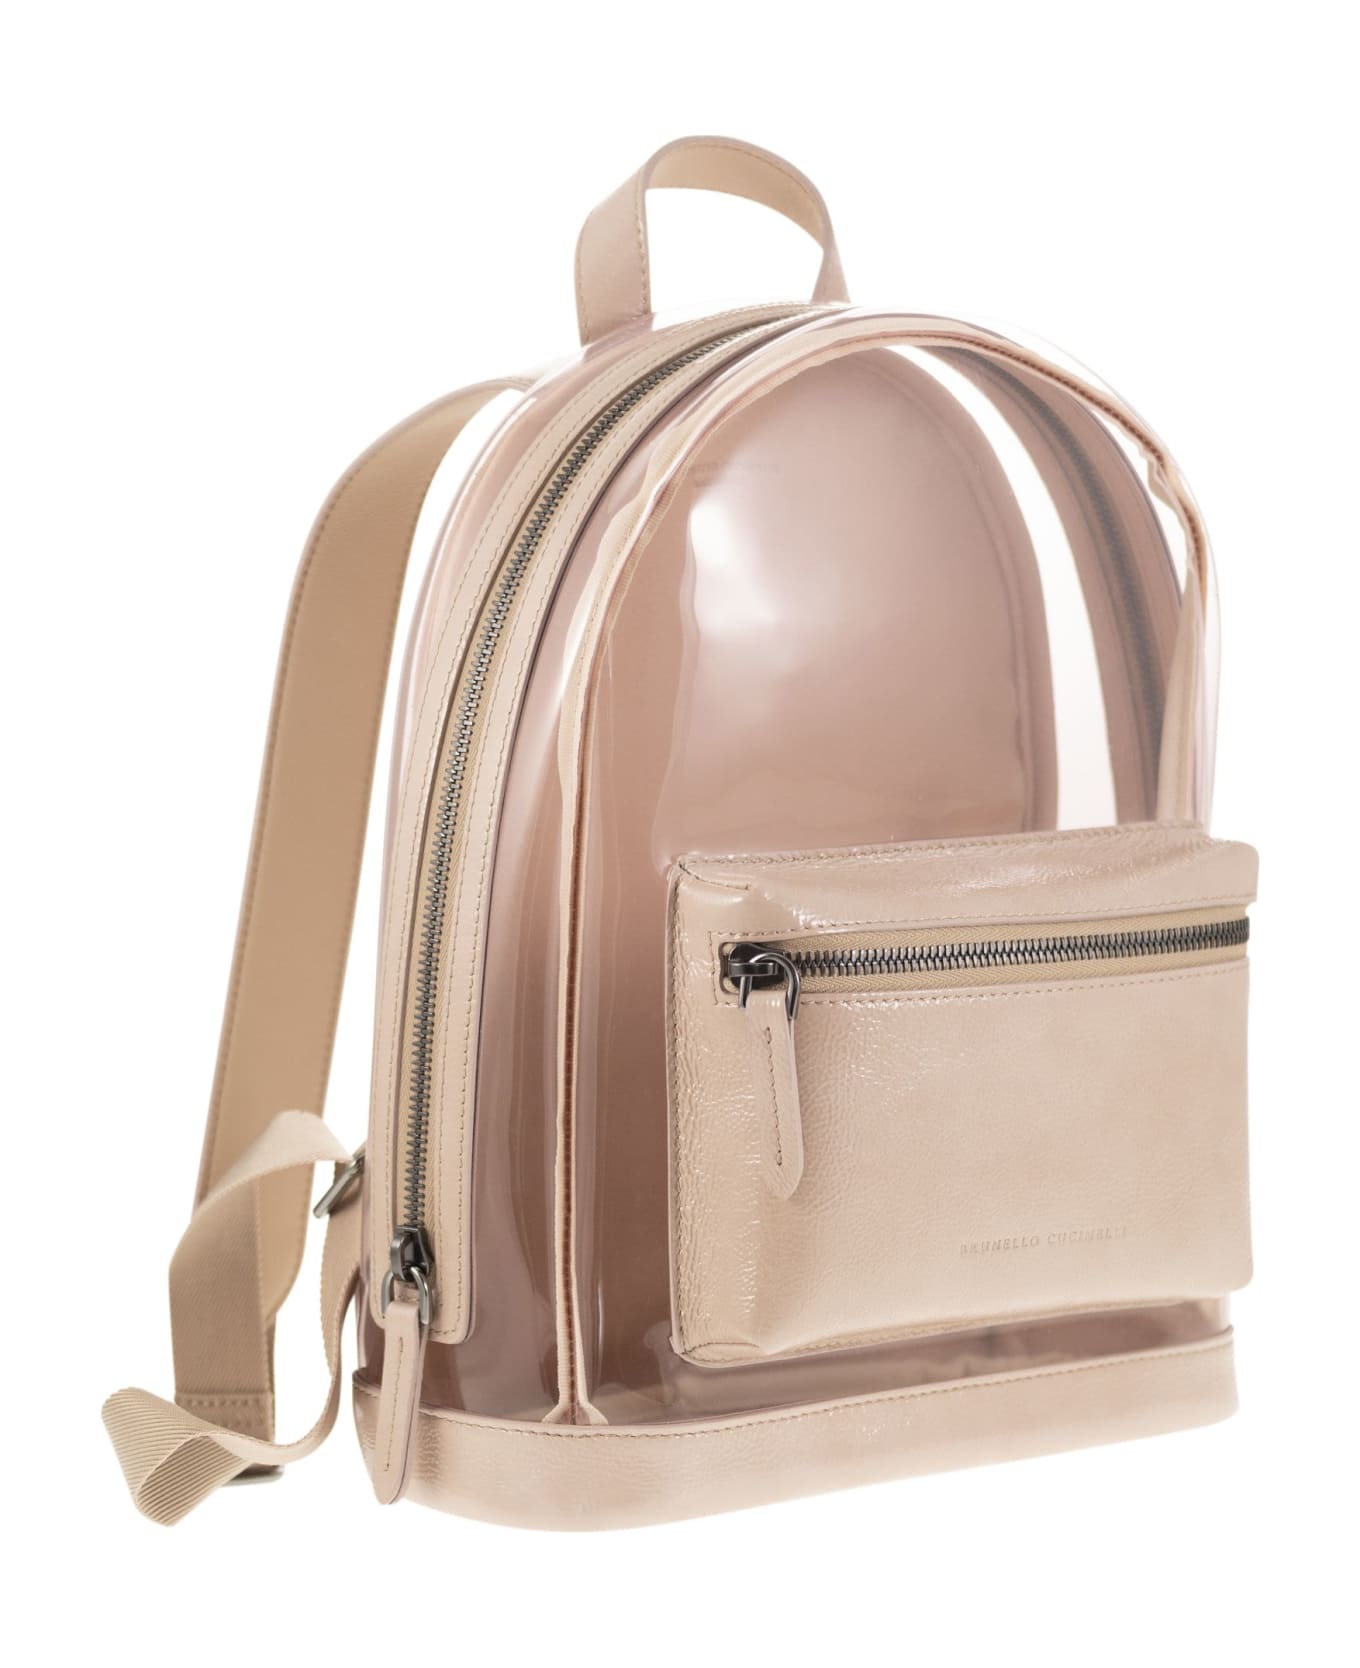 Brunello Cucinelli Sleek Pvc And Leather Backpack - Pink アクセサリー＆ギフト